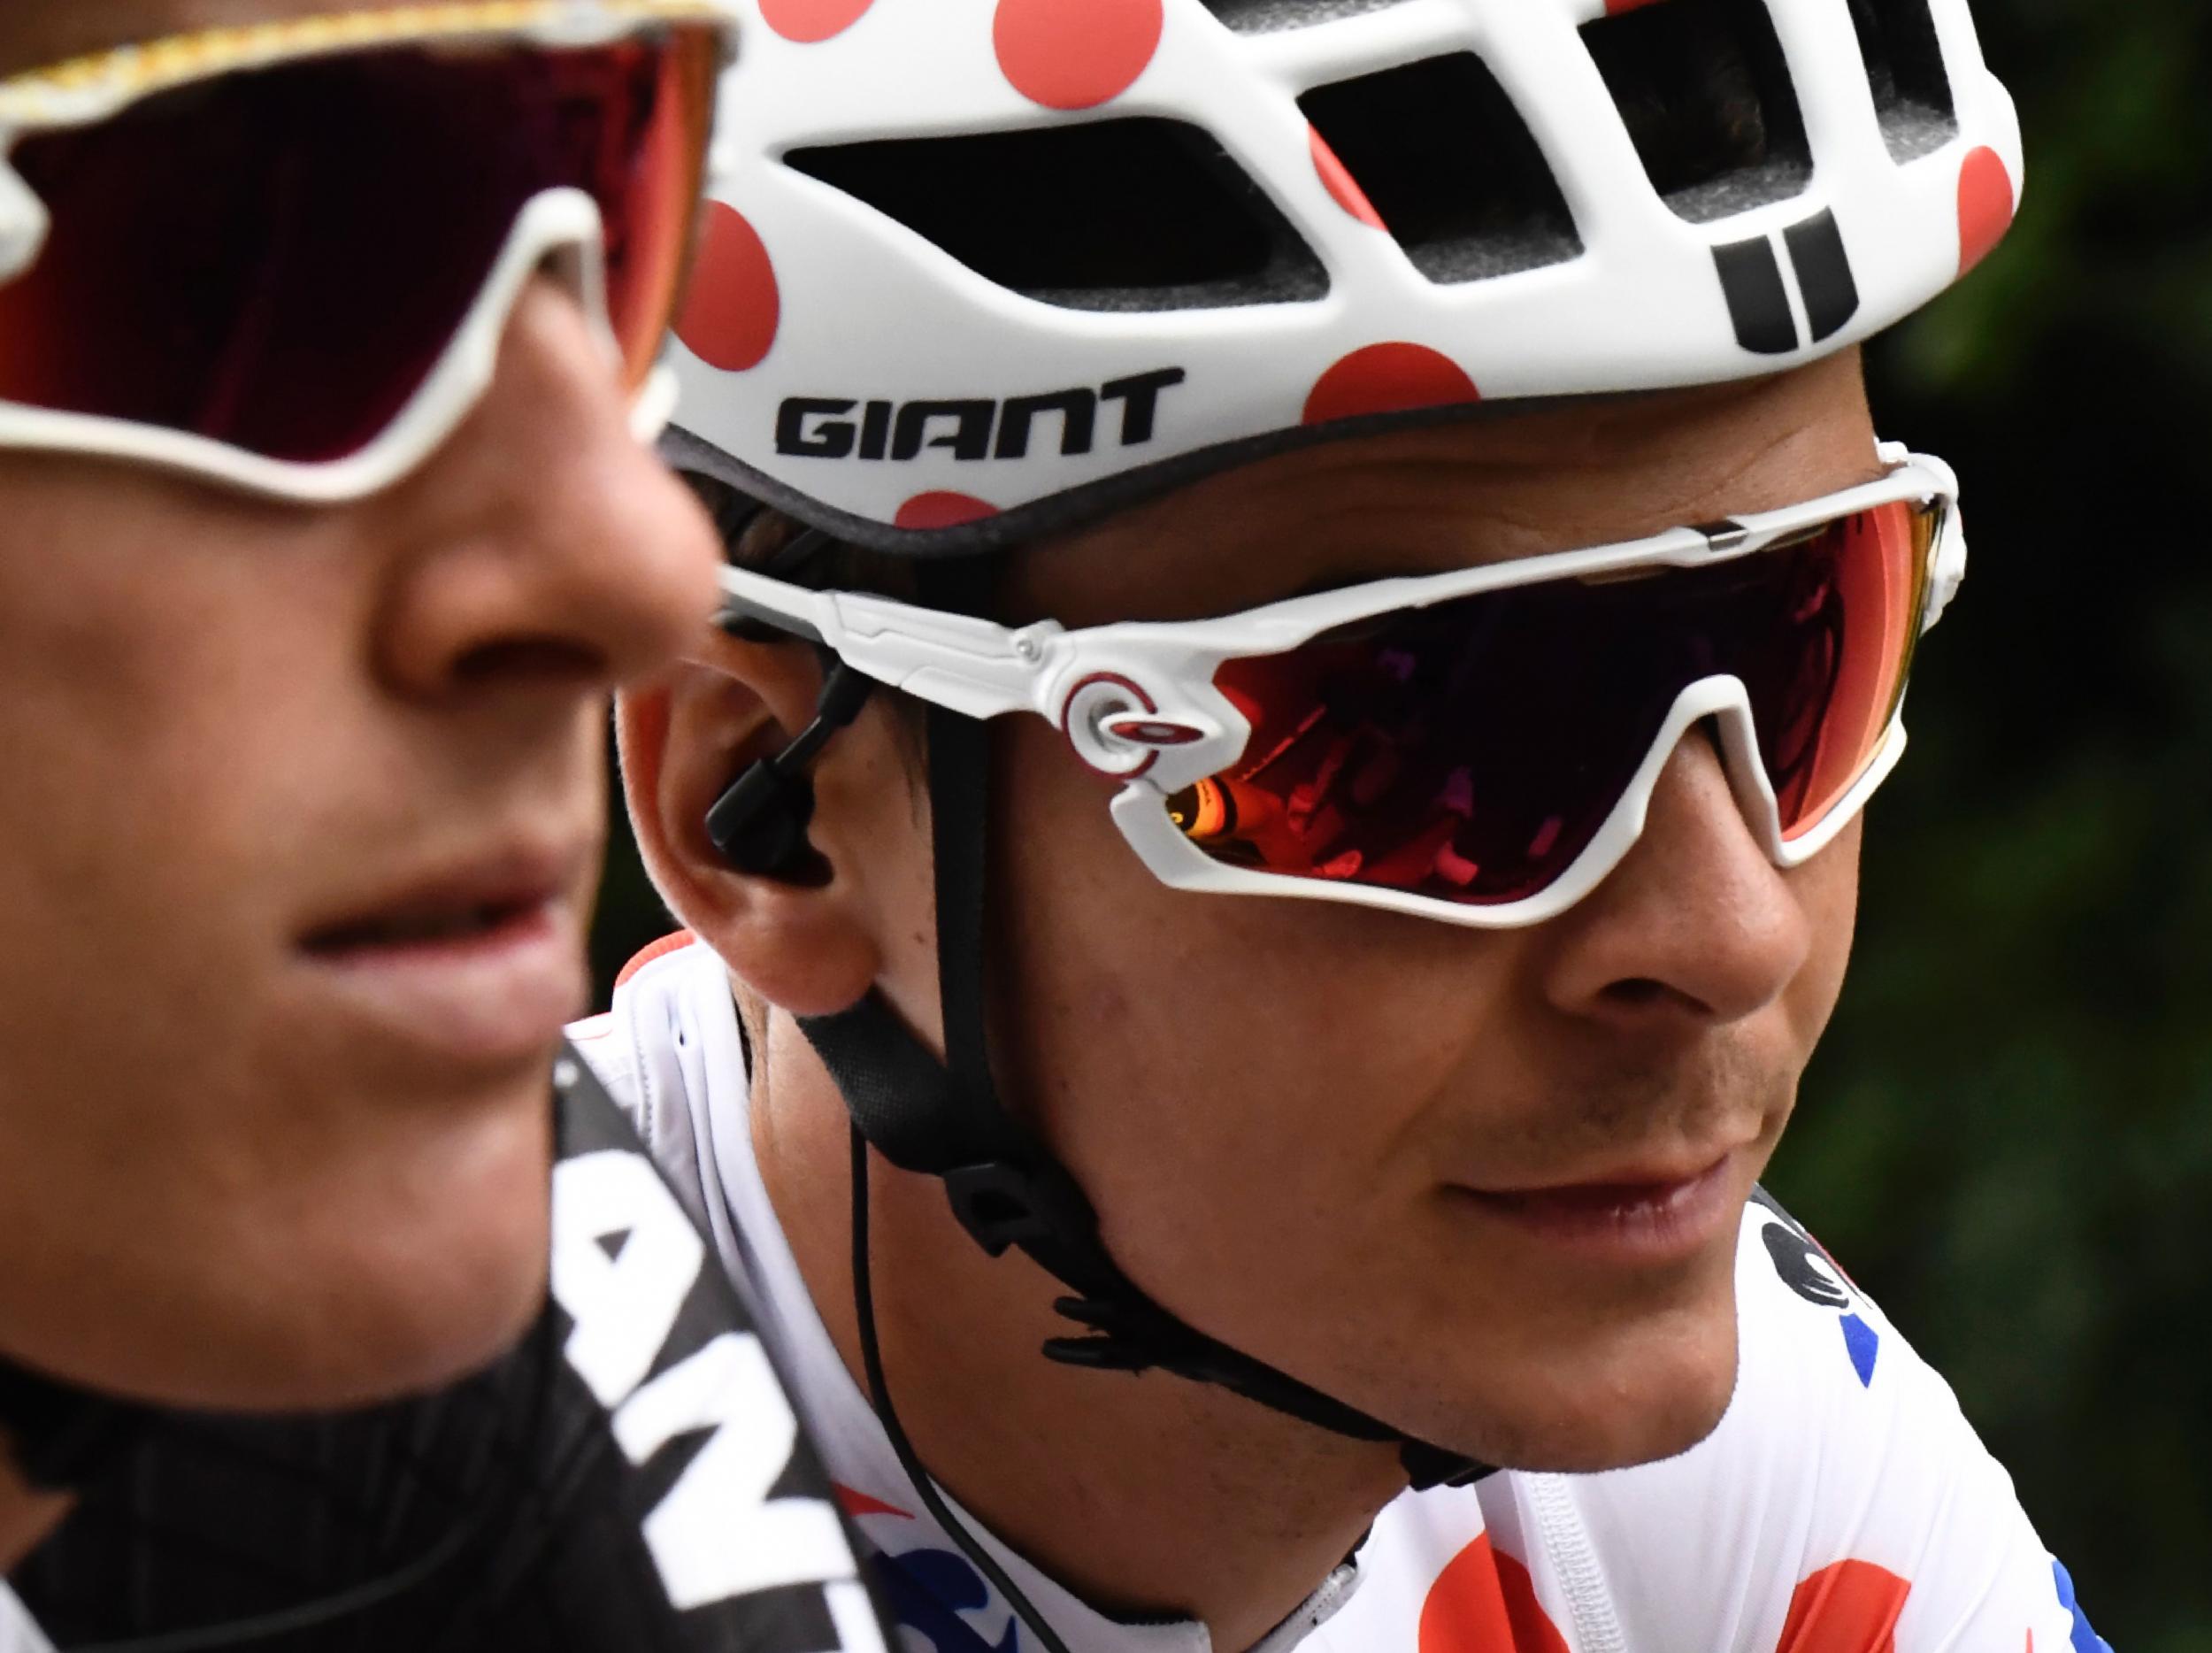 Barguil has emerged as a popular figure